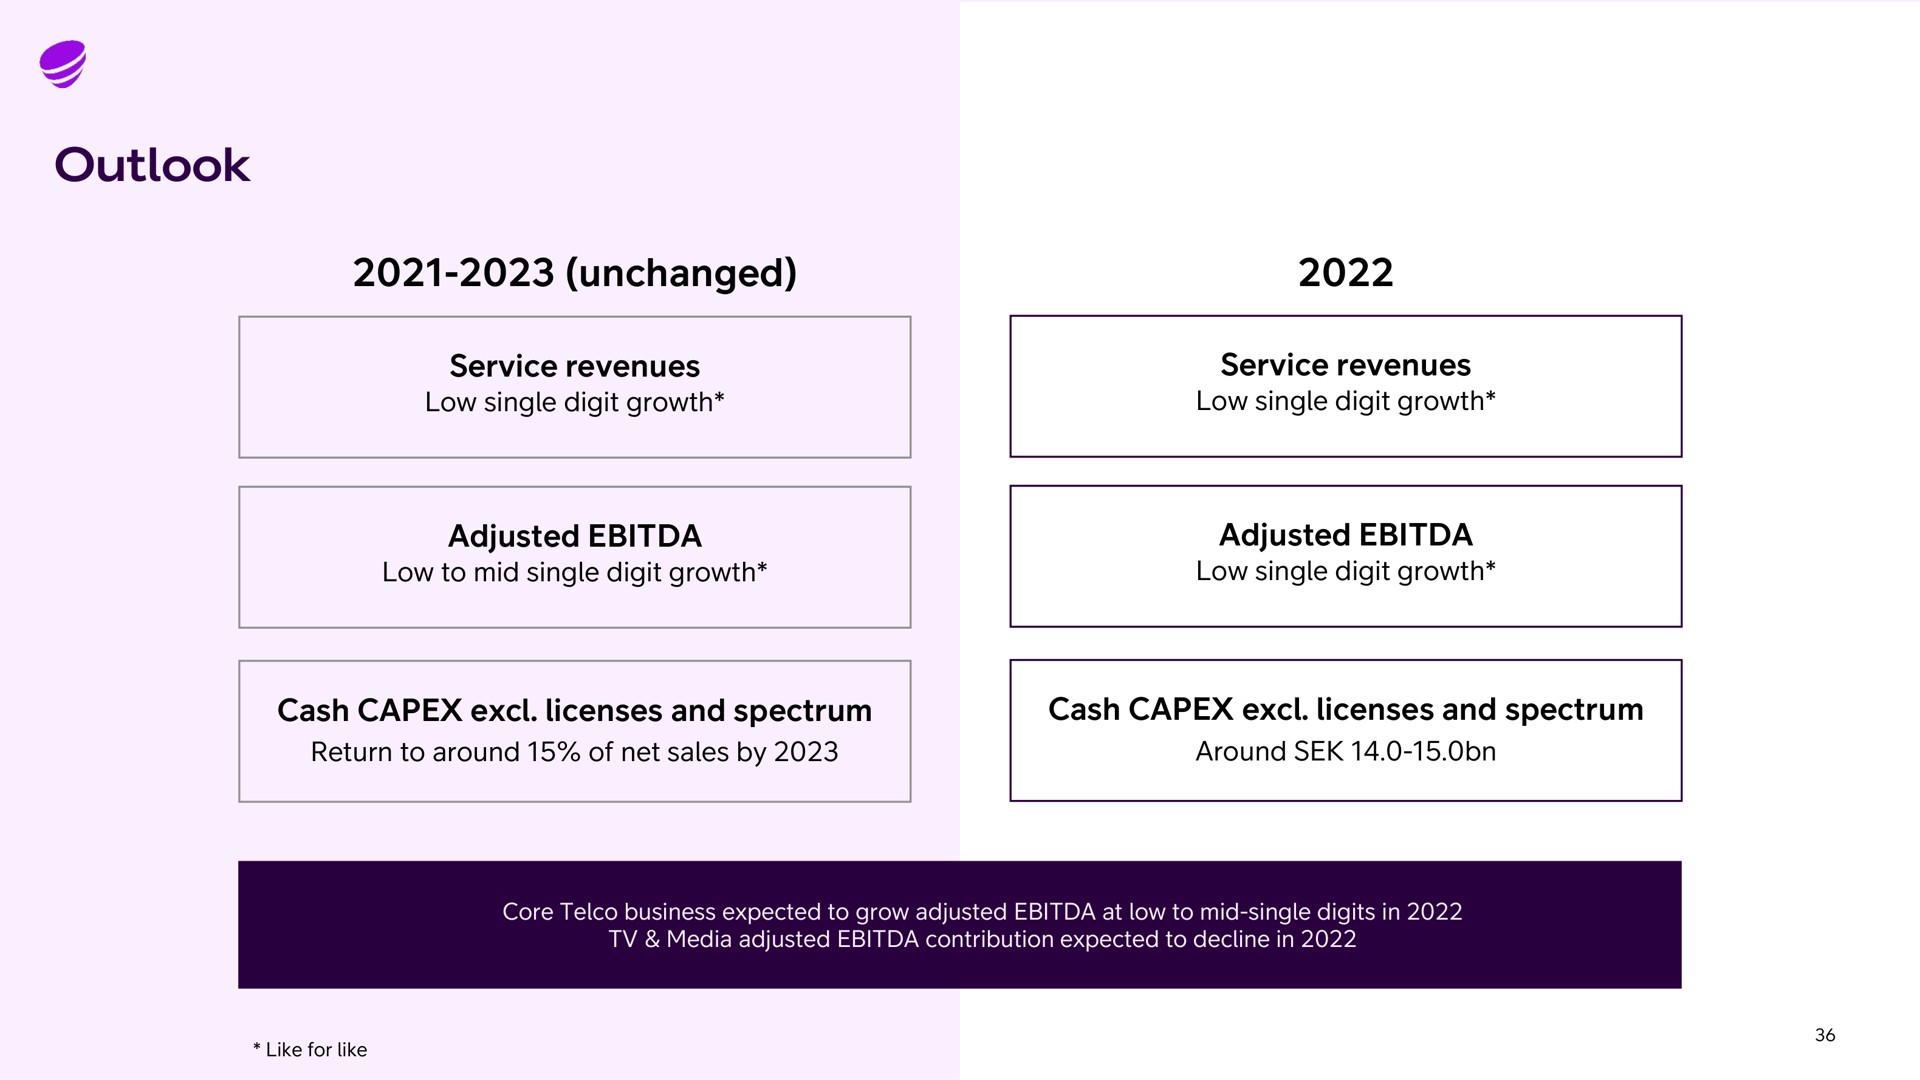 outlook unchanged service revenues low single digit growth service revenues low single digit growth adjusted low to mid single digit growth adjusted low single digit growth cash licenses and spectrum return to around of net sales by cash licenses and spectrum around as | Telia Company